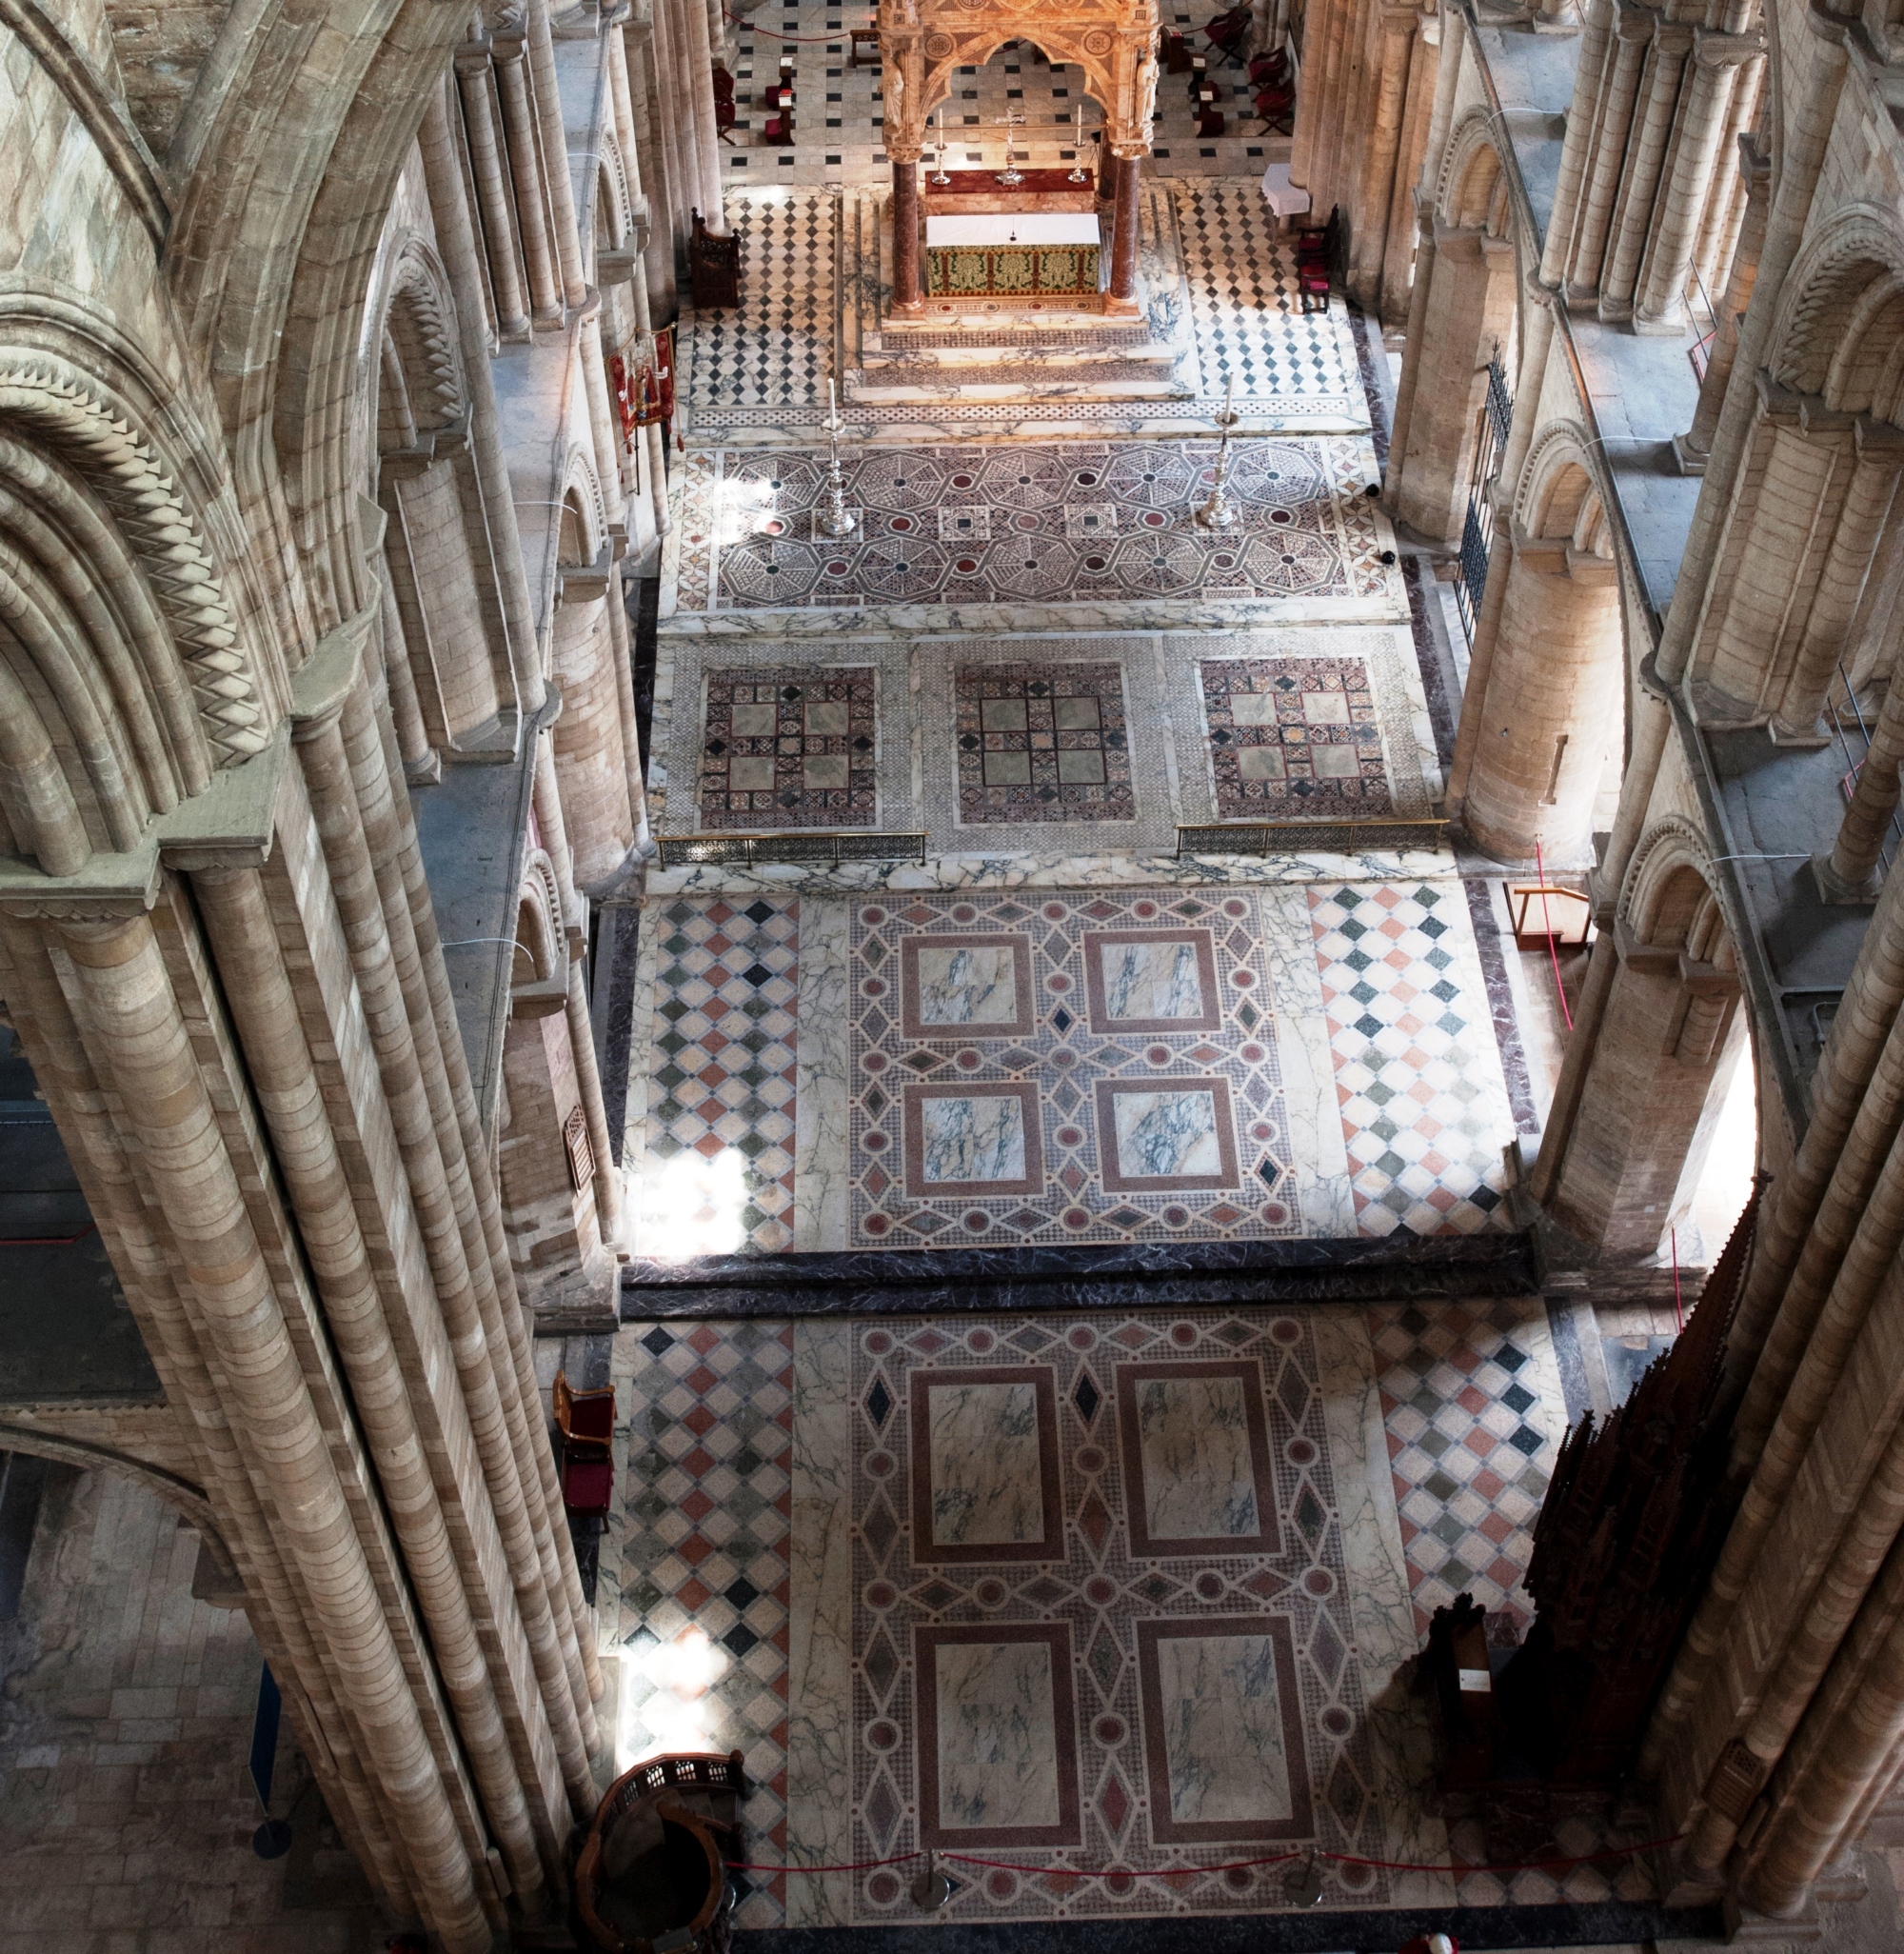 The view from the upper levels at Peterborough Cathedral